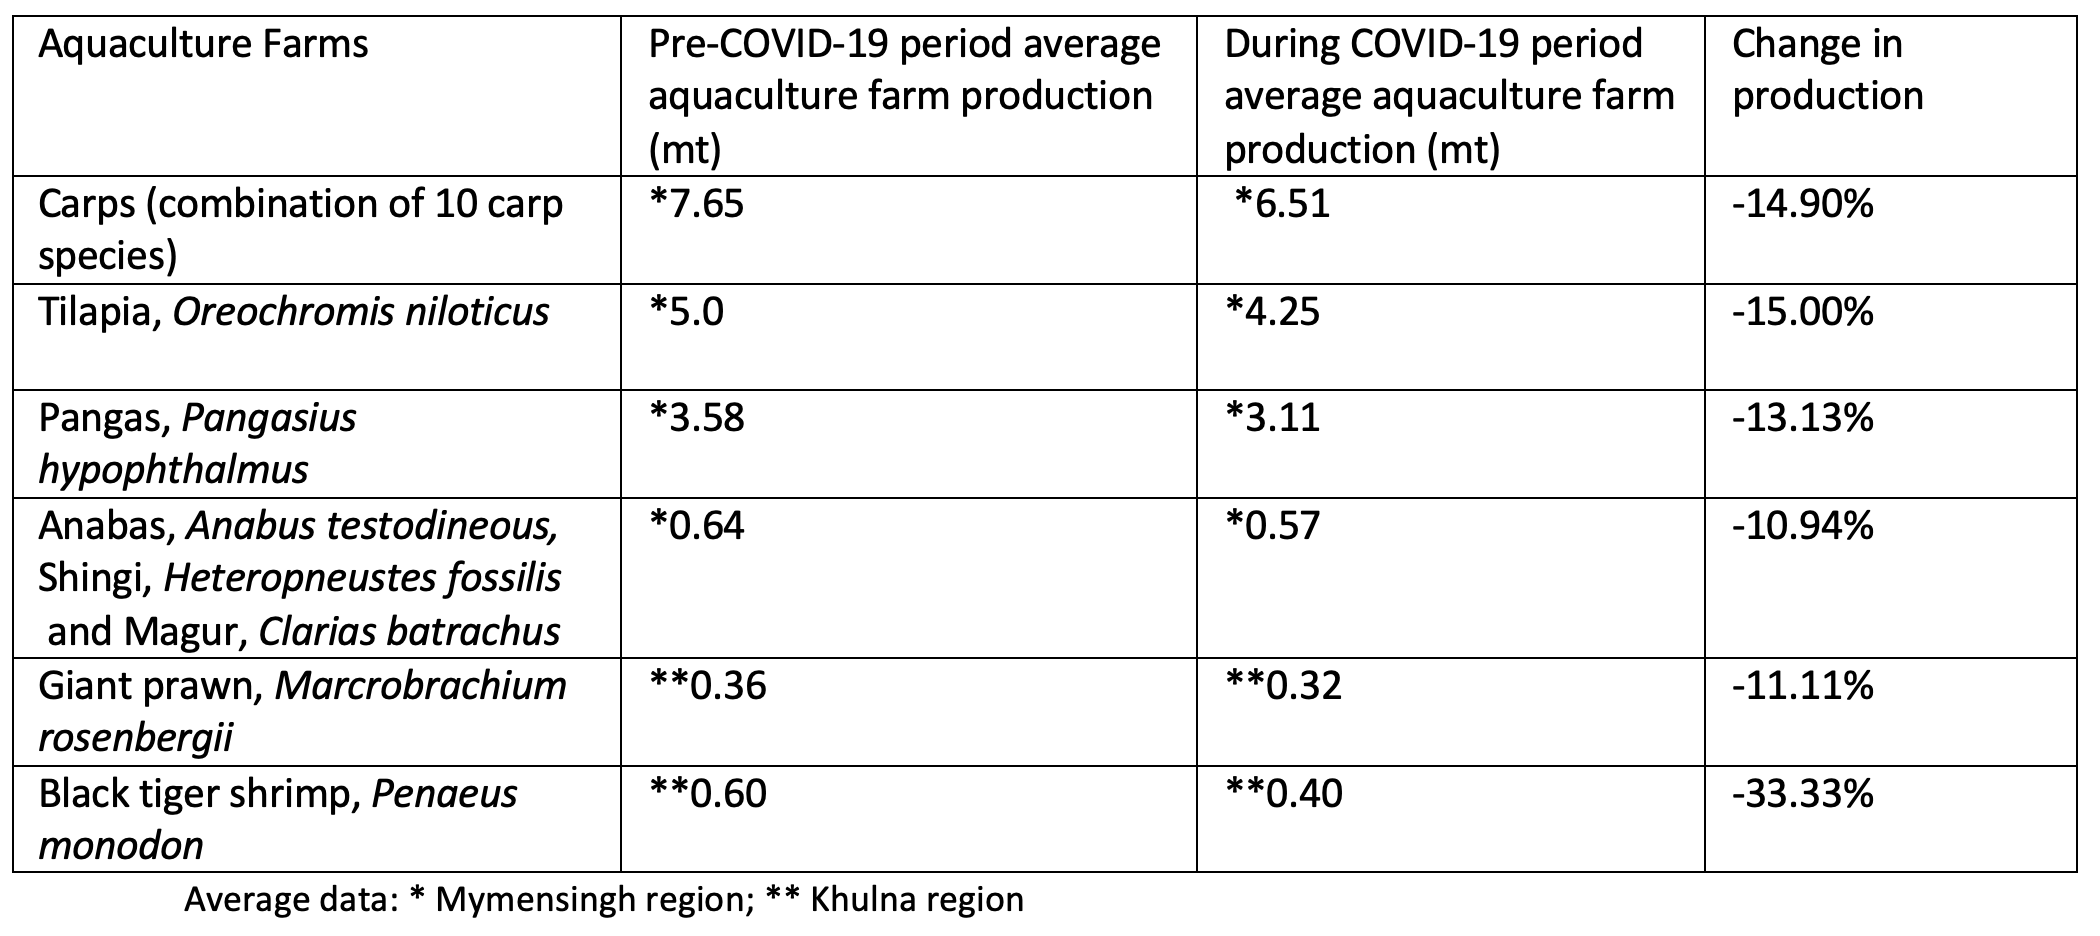 Table 2. Comparative average aquaculture farm production of major species during pre-COVID-19 period (March – September 2019) and COVID-19 period (March – July 2020)